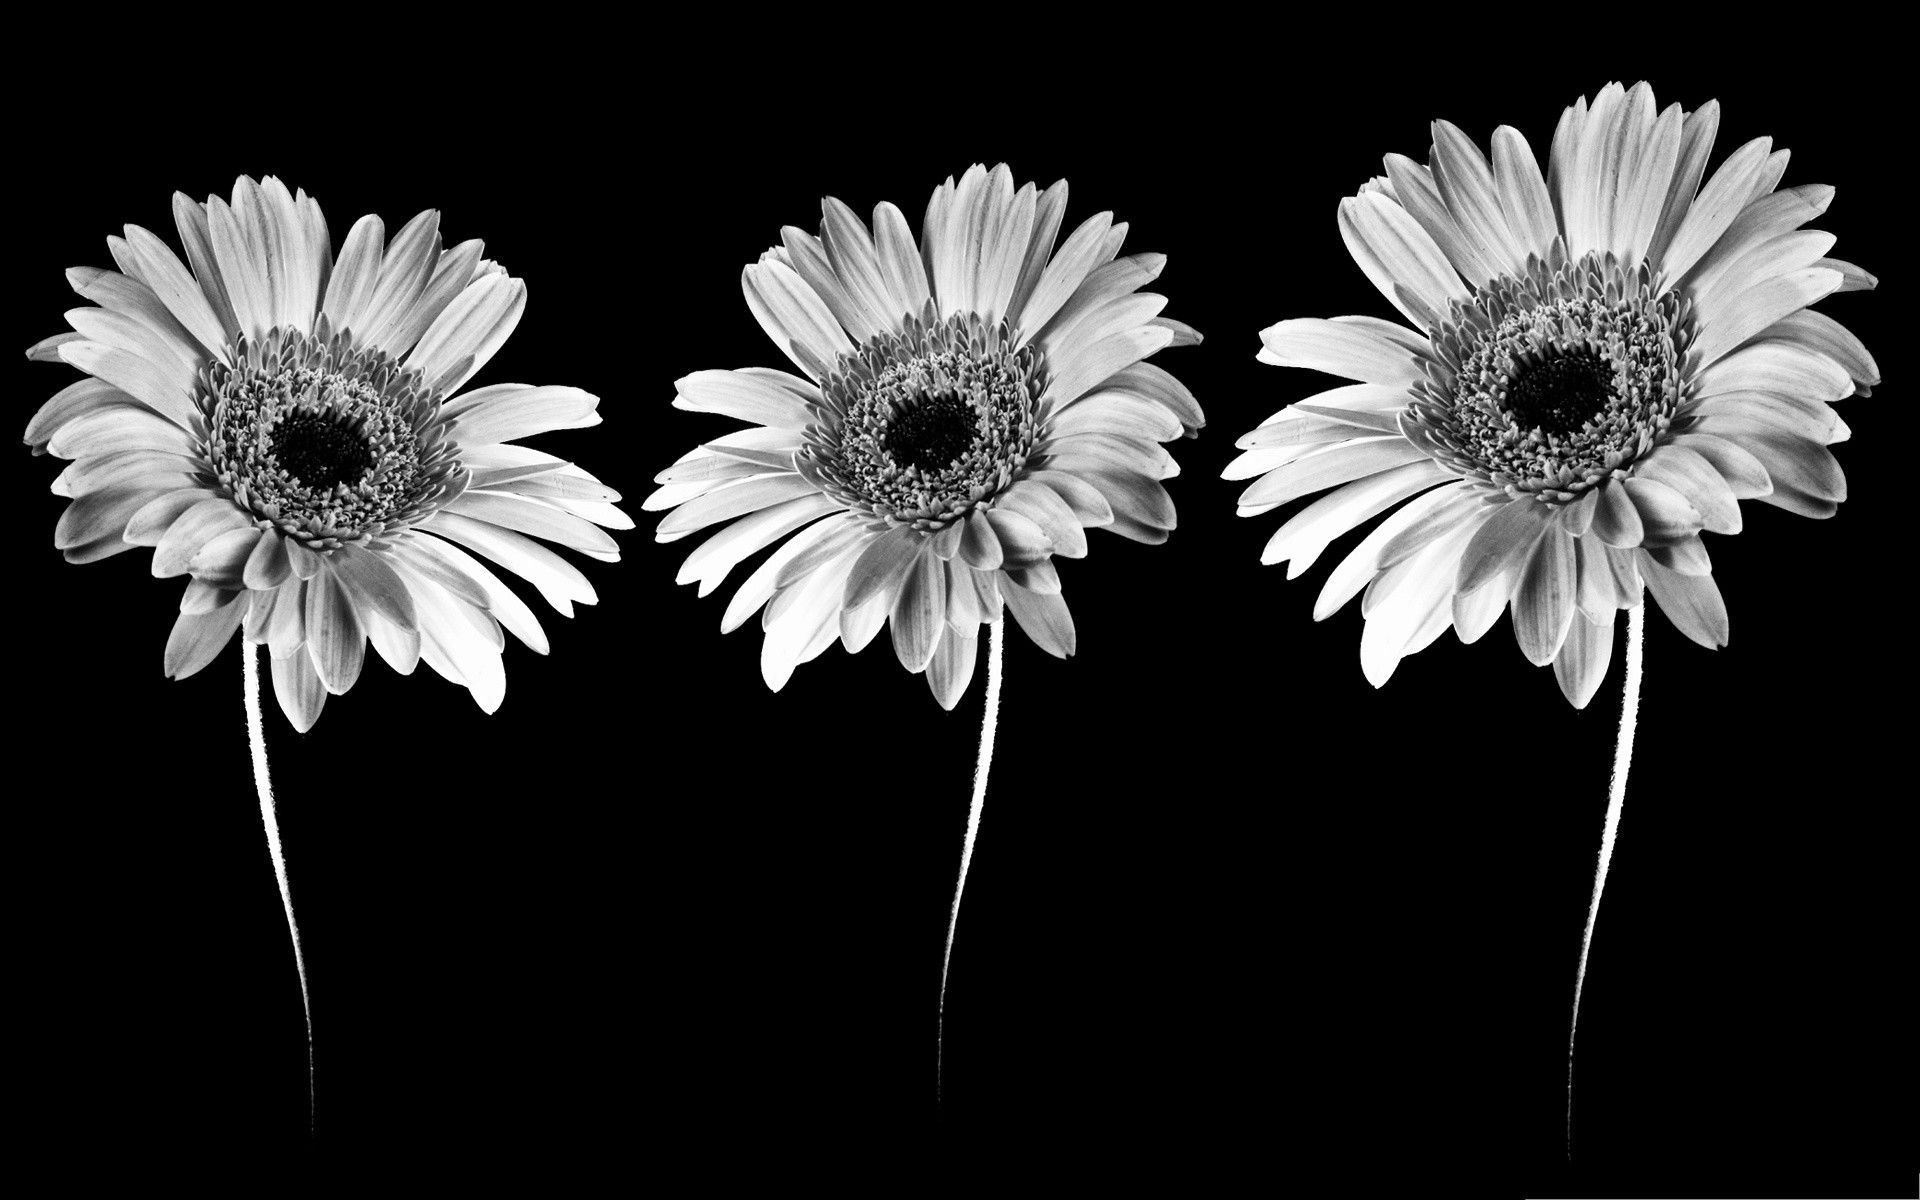 Three daisies in black and white - Black, black and white